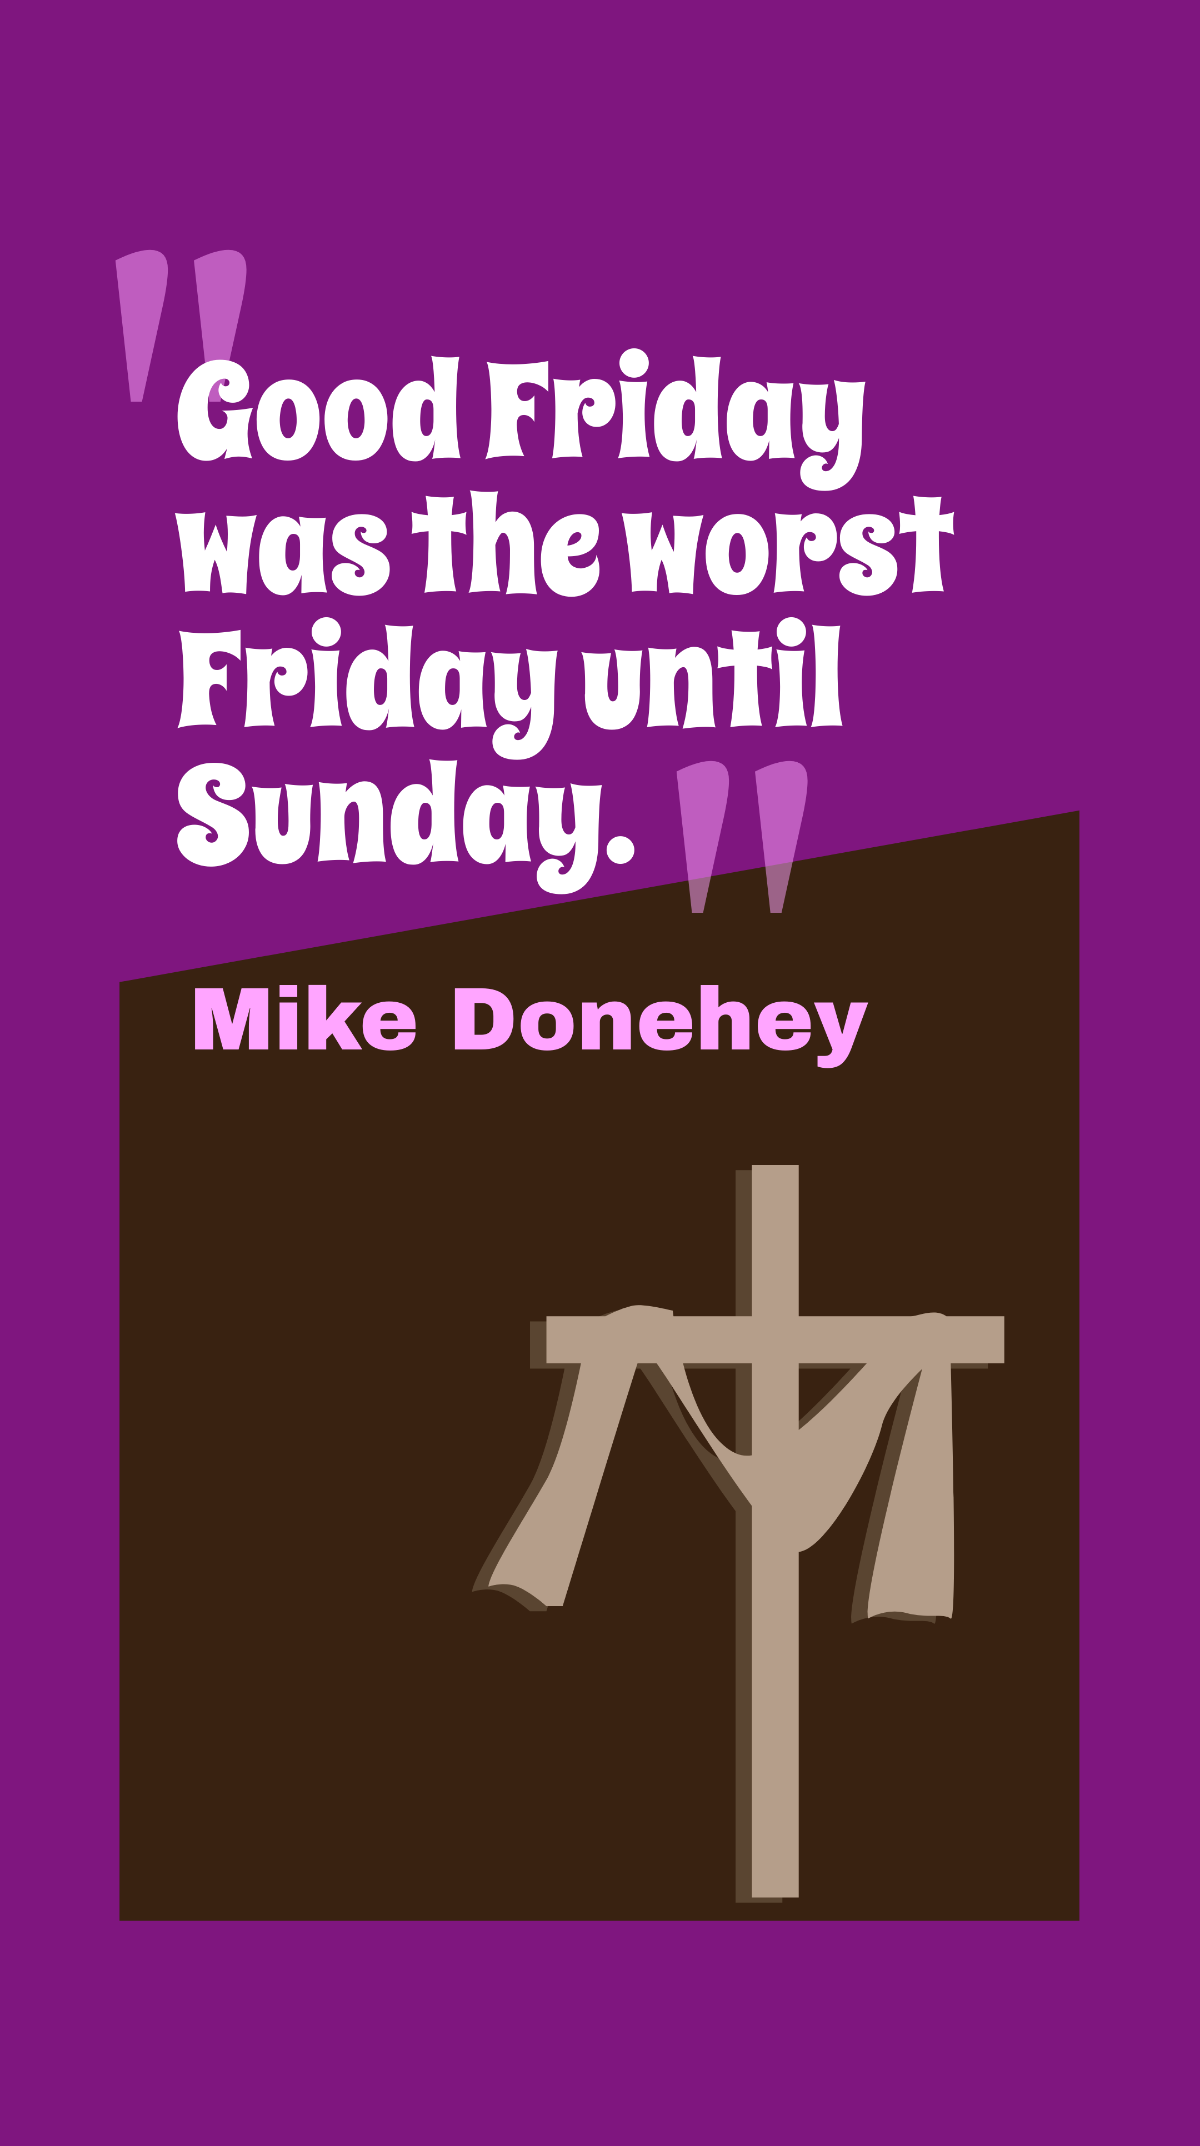 Mike Donehey - Good Friday was the worst Friday until Sunday. Template